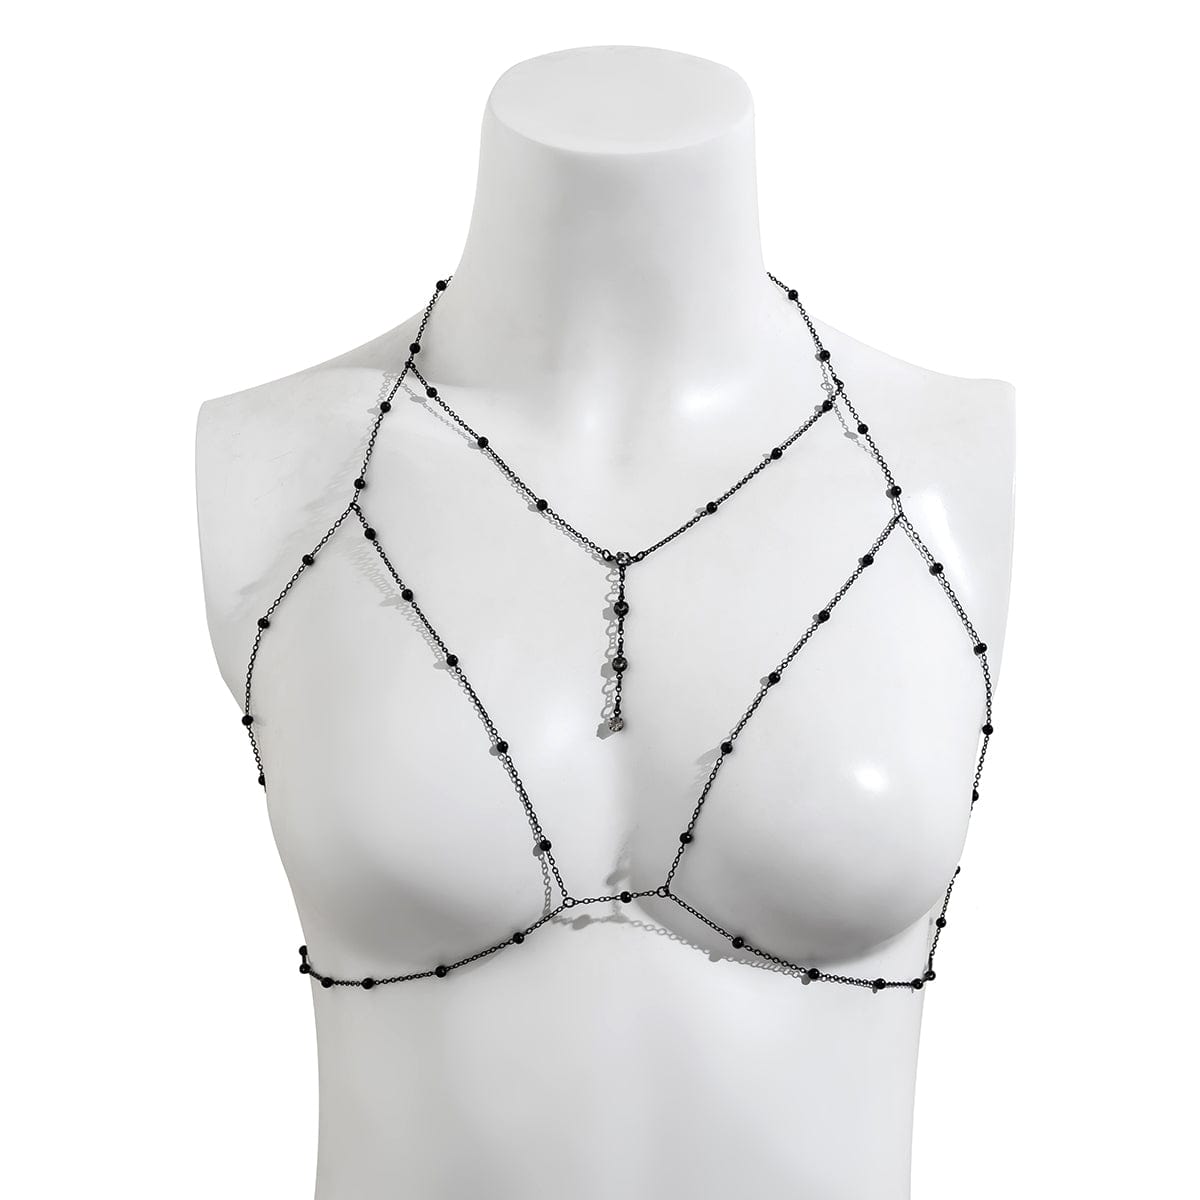 Chic Hollowed-Out Cobweb Necklace Chain Bra Set